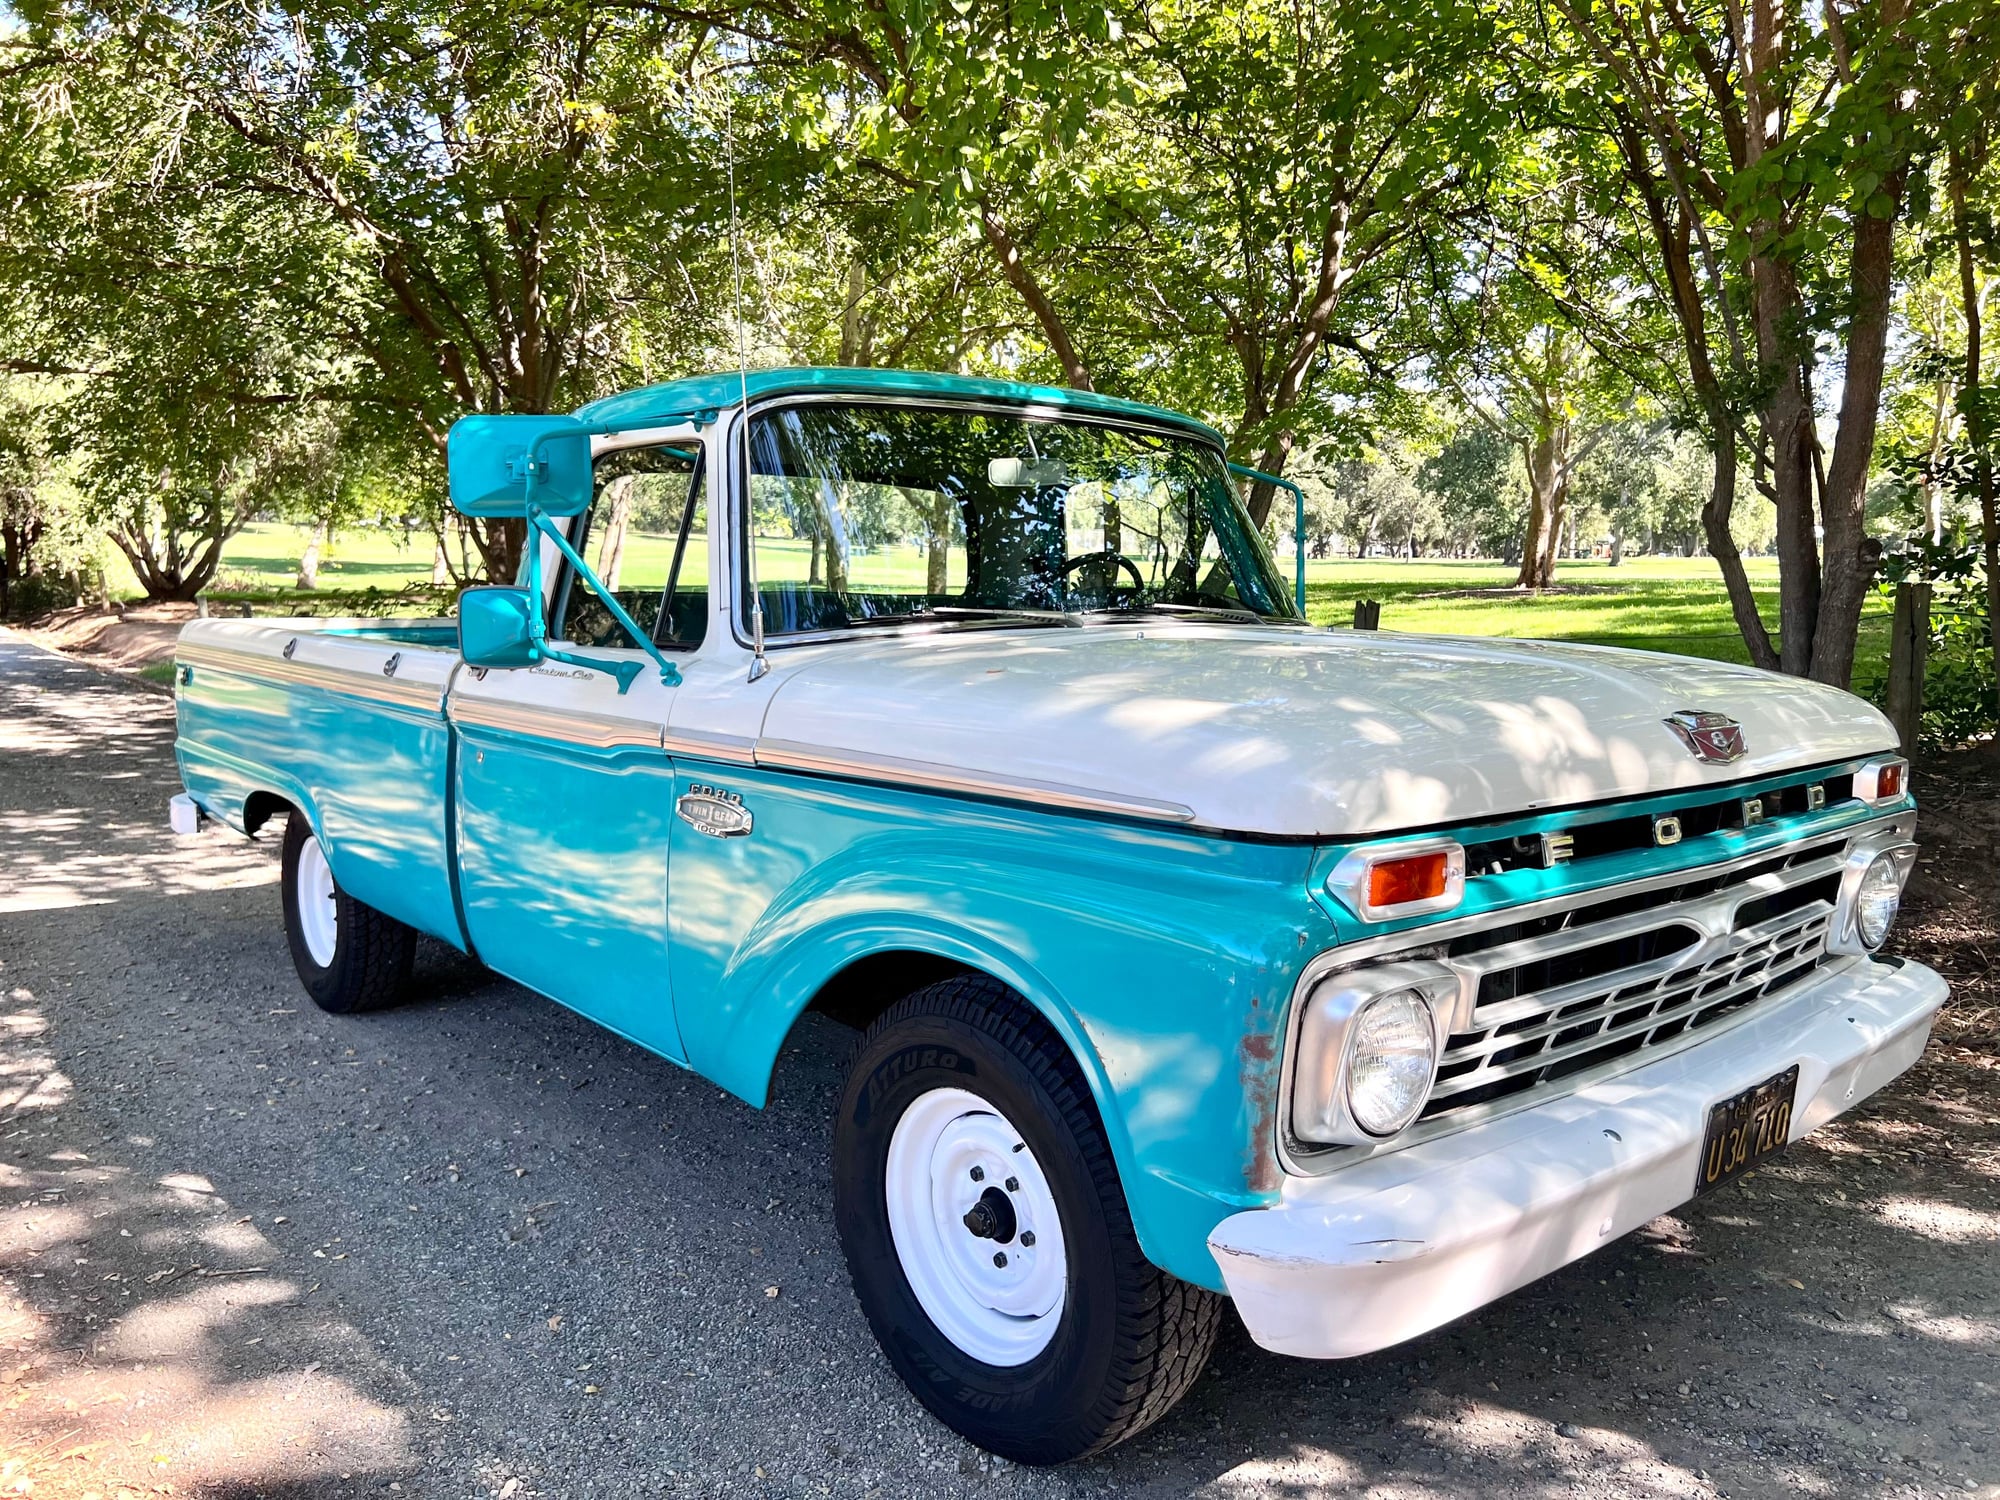 1966 Ford F-100 - 1966 Ford F100 390 V8 automatic - Used - VIN F10YR832052 - 1,000 Miles - 8 cyl - 2WD - Automatic - Truck - Other - Chico, CA 95973, United States